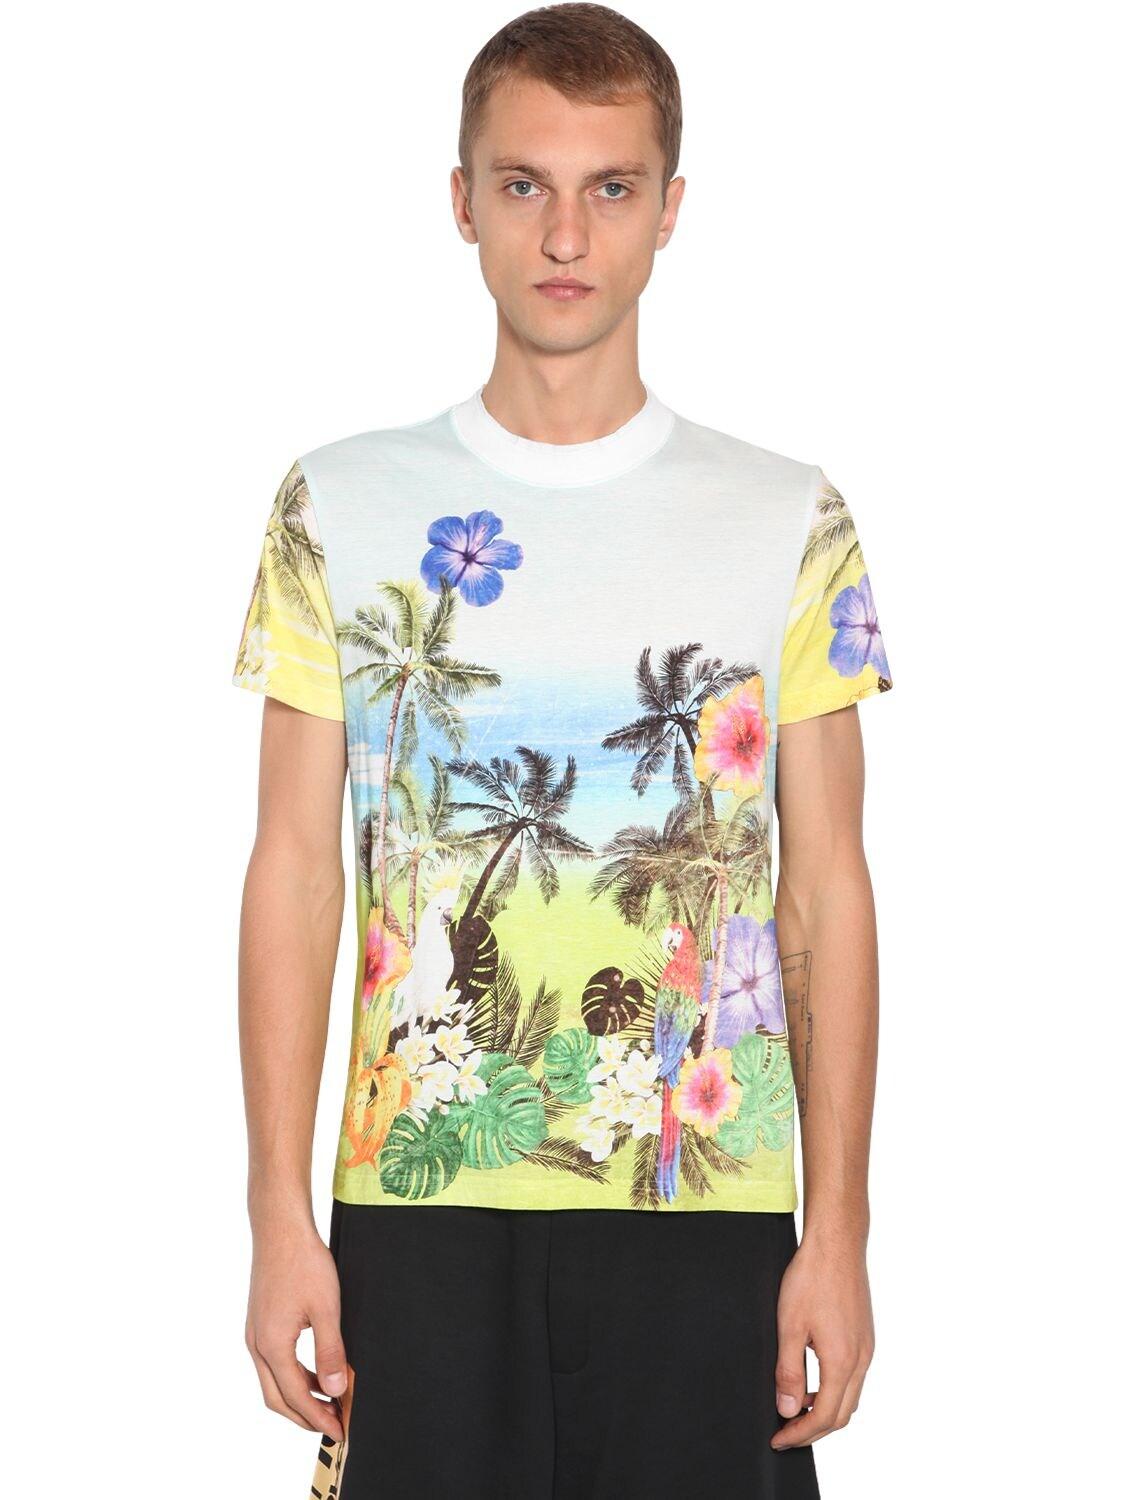 Versace Jeans Couture Hawaii Print Cotton T-shirt for Men - Lyst